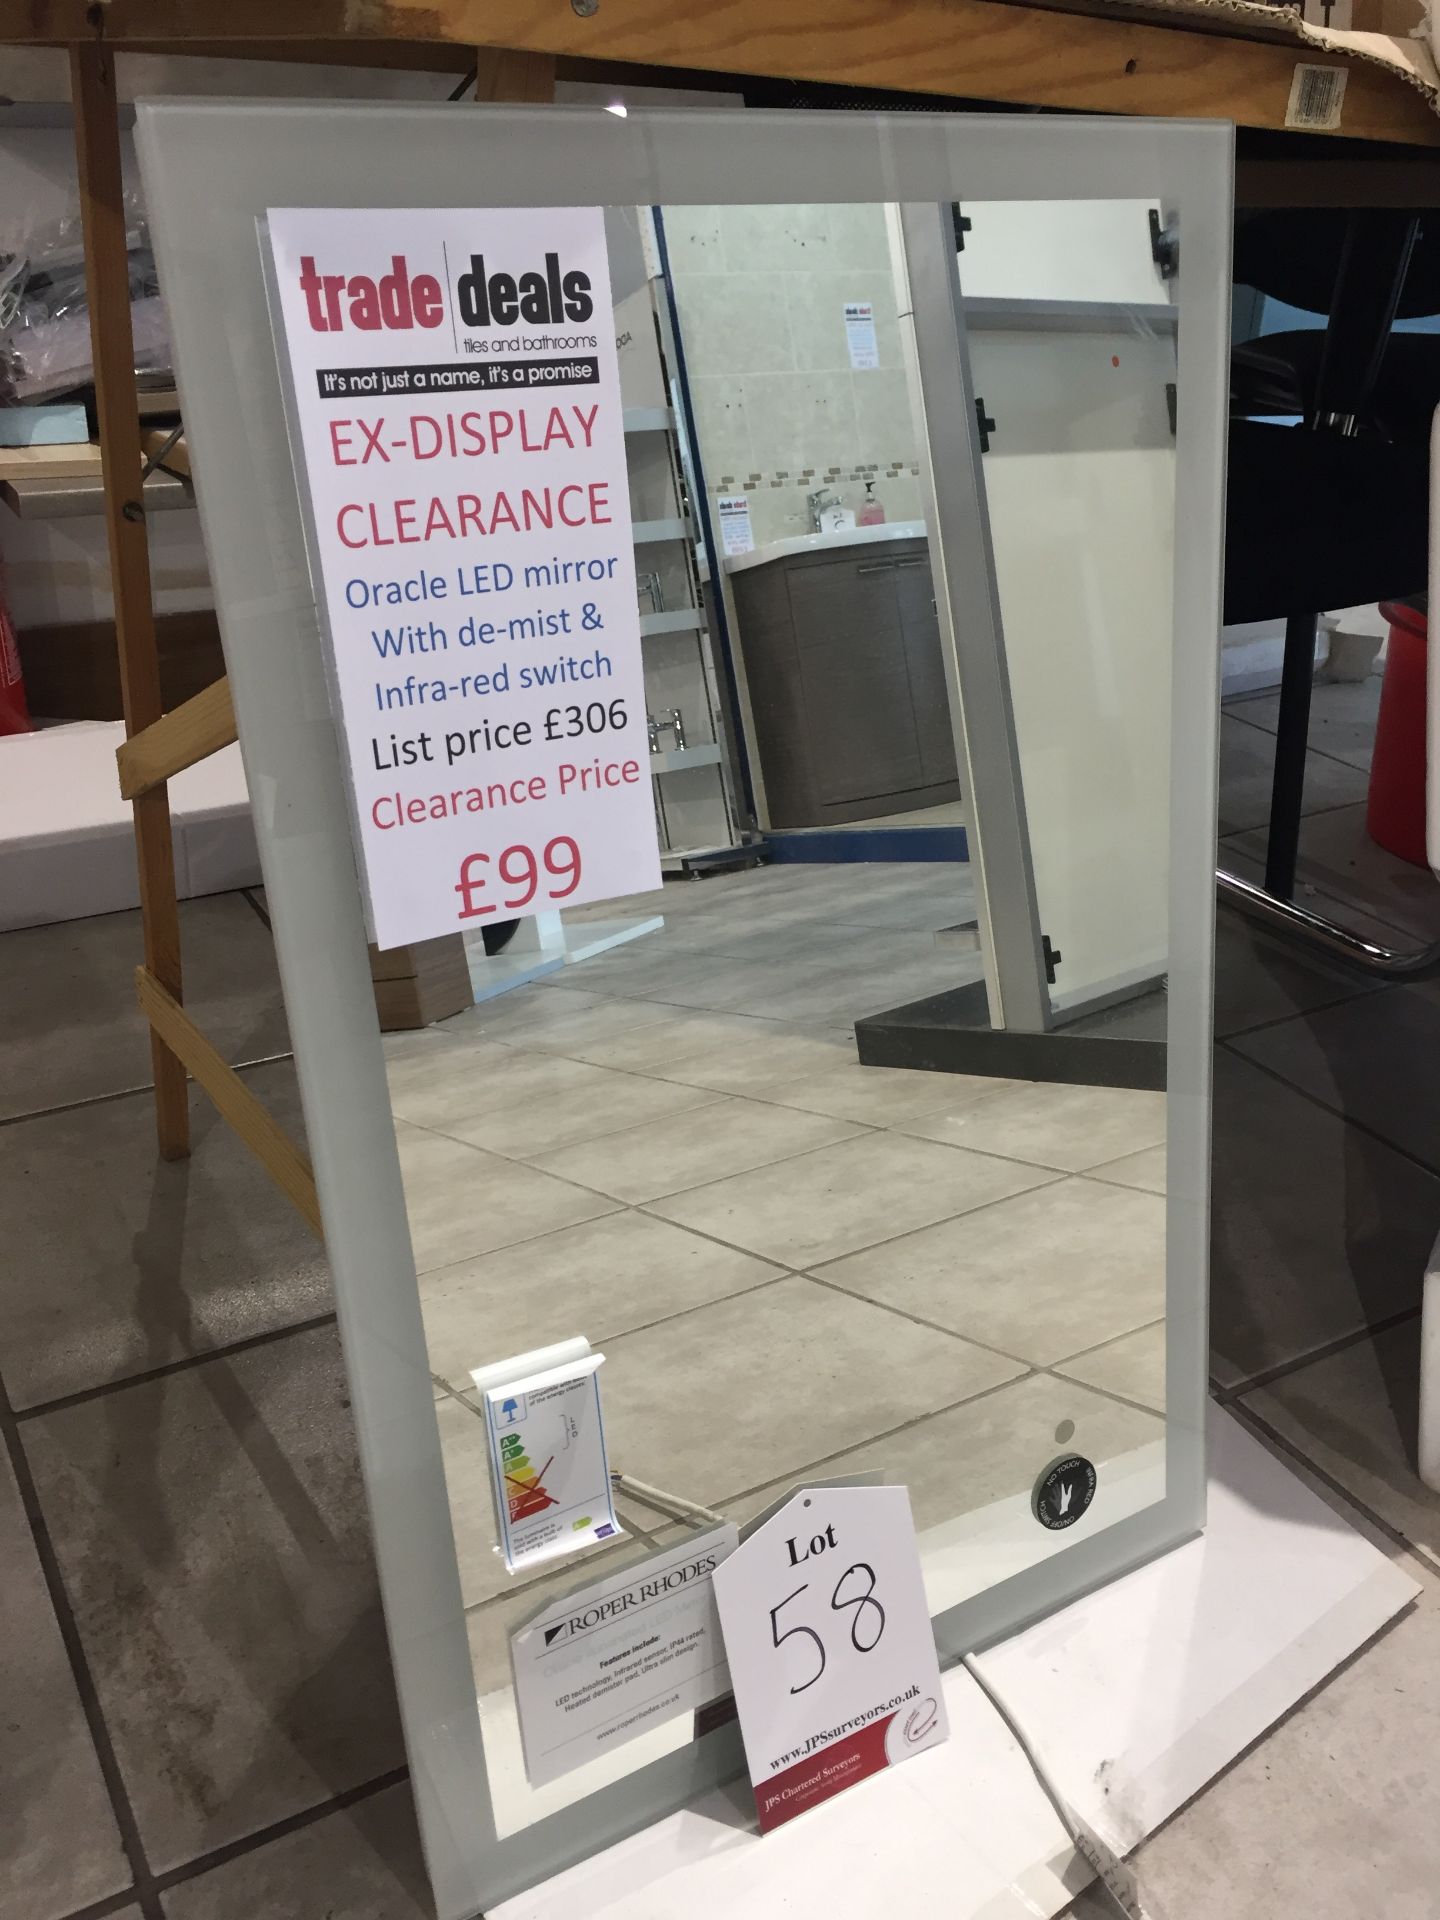 Oracle LED mirror w/ de-mist & infrared switch (450x700mm) £300 reduced to £99